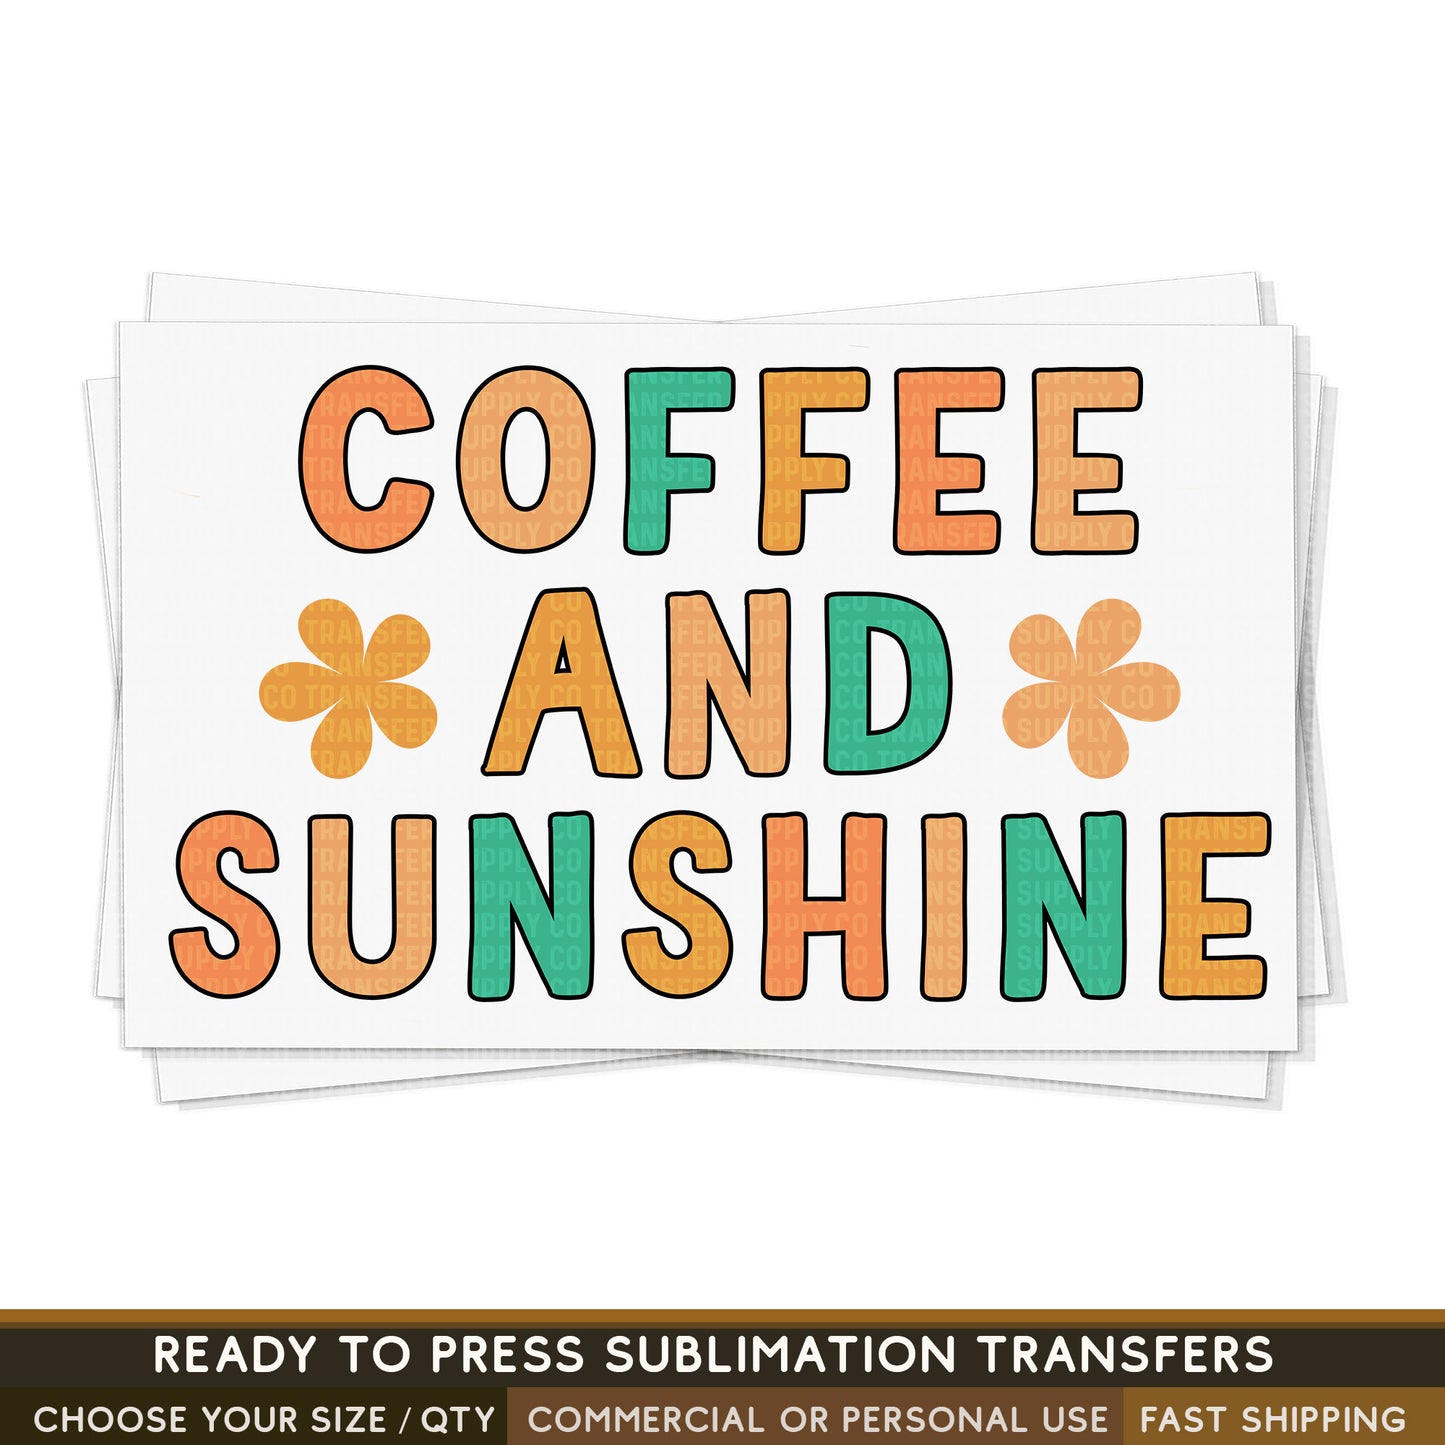 Coffee and Sunshine Sublimation Transfer,  Trendy Ready To Press Sublimation Transfers, Sublimation Prints, Sublimation Transfers